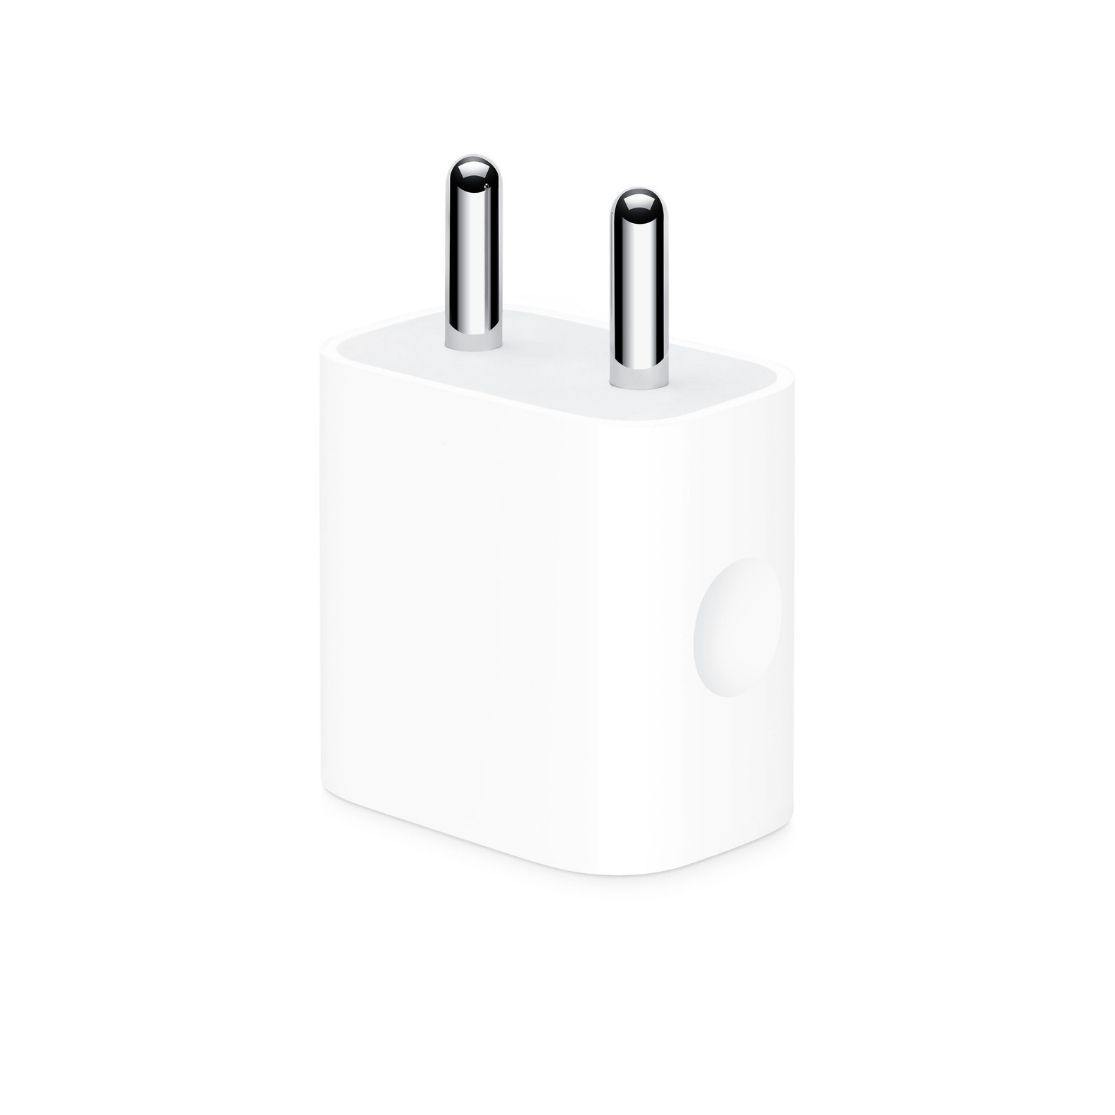 Apple 20W USB-C Power Adapter | White | MHJD3HN/A - QuickTech.in